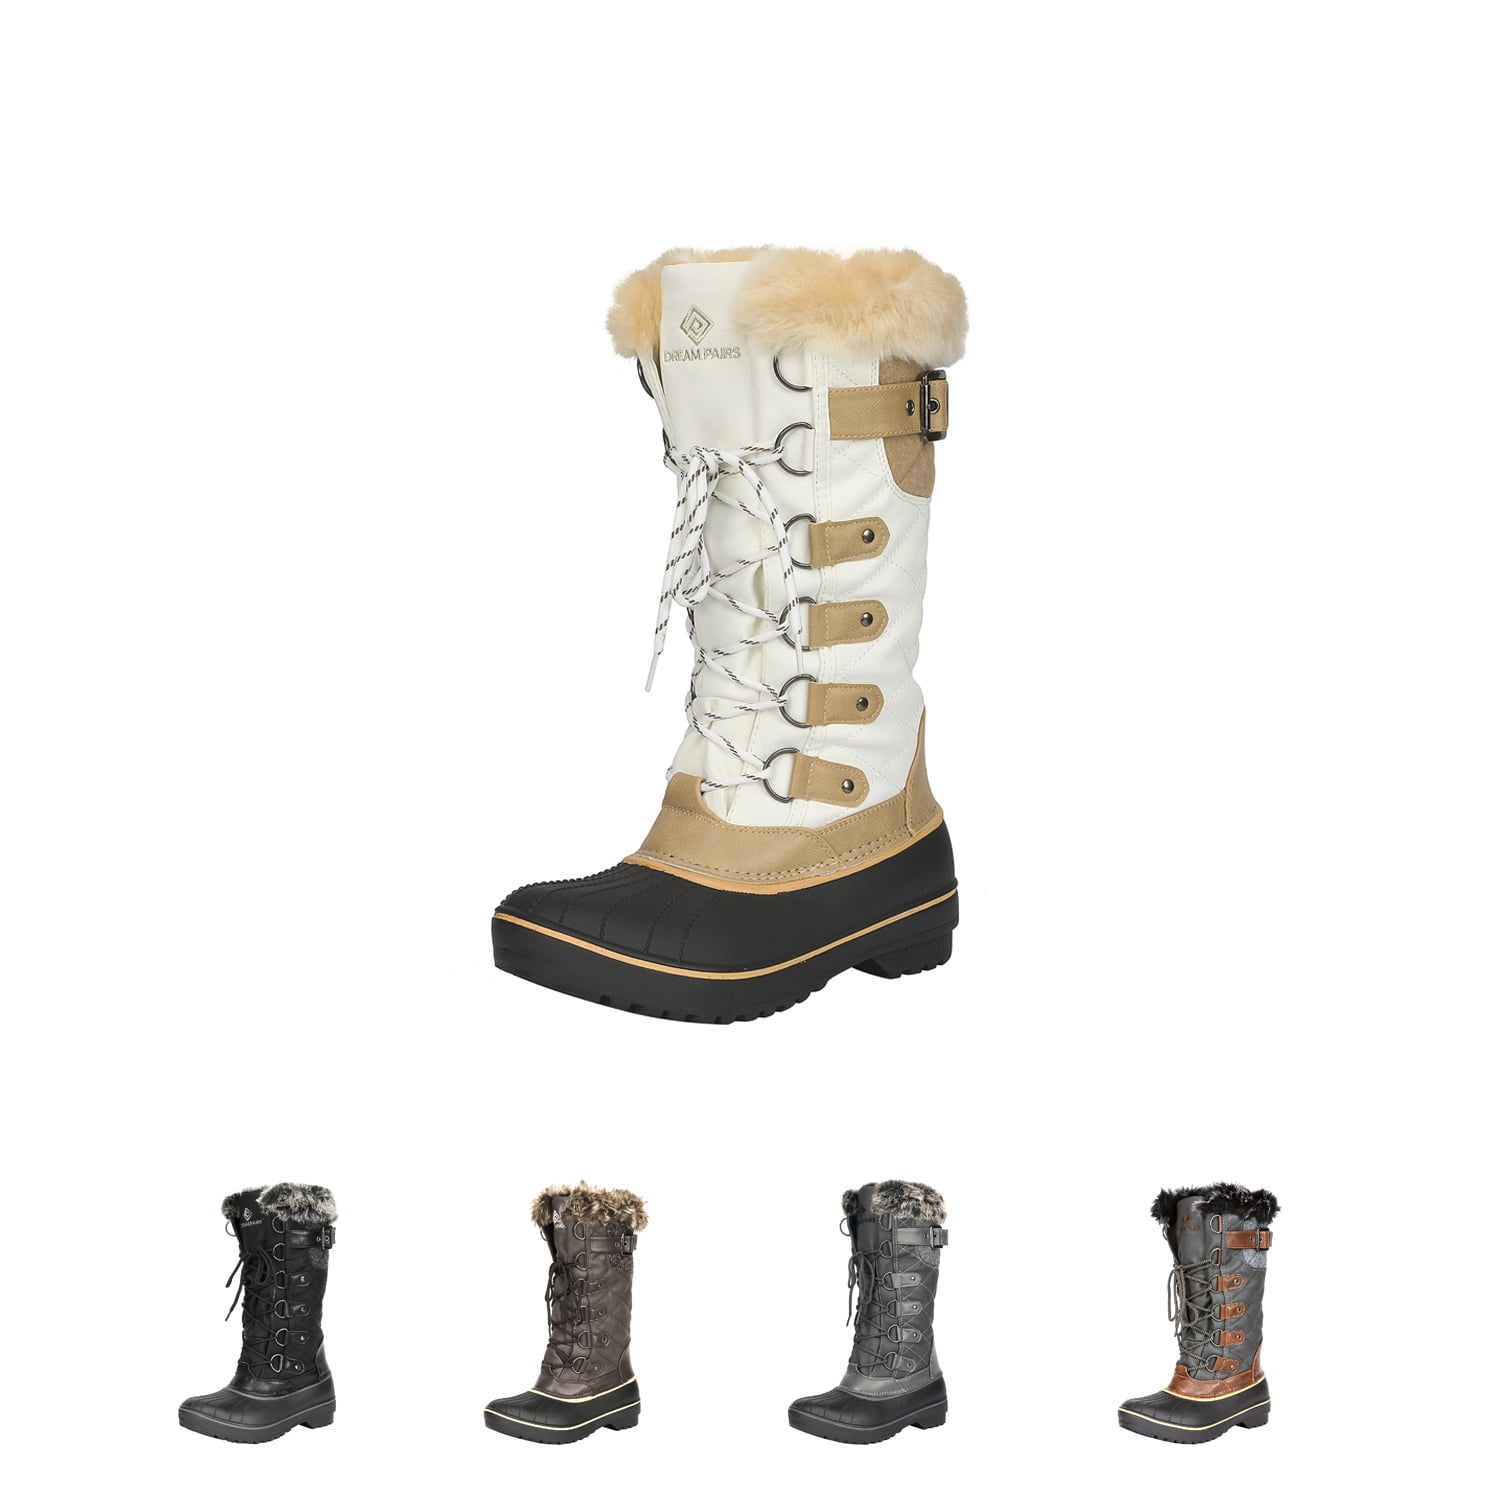 Details about   DREAM PAIRS Women's Warm Faux Fur Lined Mid-Calf Winter Snow Boots